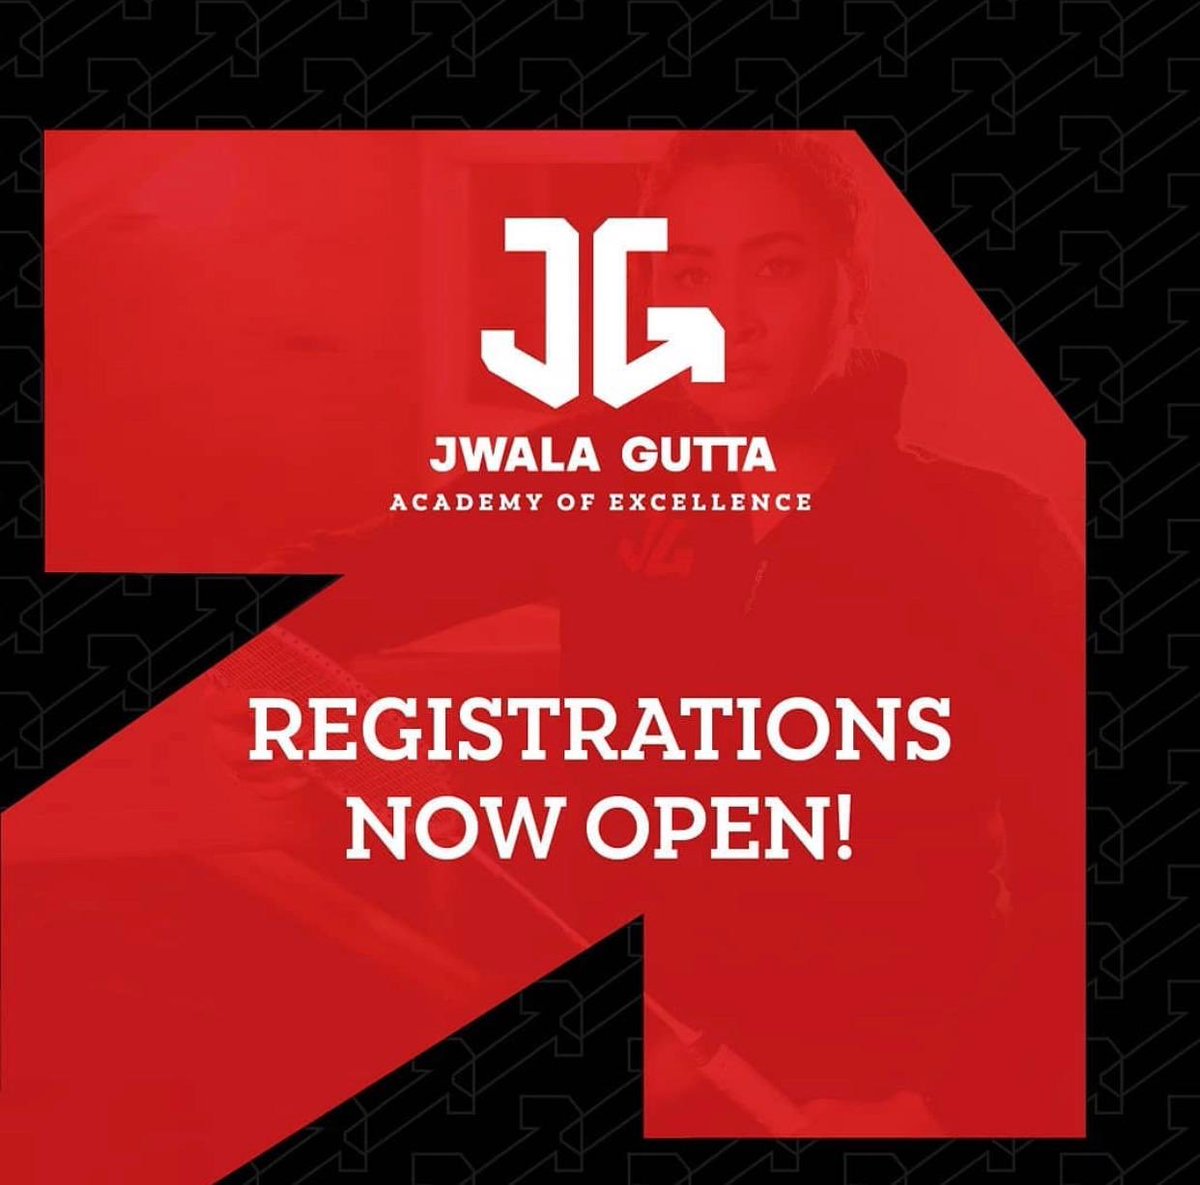 All you sports enthusiasts, here’s your chance to create history. Log on to jwalaguttaacademy.com/launch/ enroll now and make us all proud. Congratulations once again champ @Guttajwala for #Jwalaguttaacademy